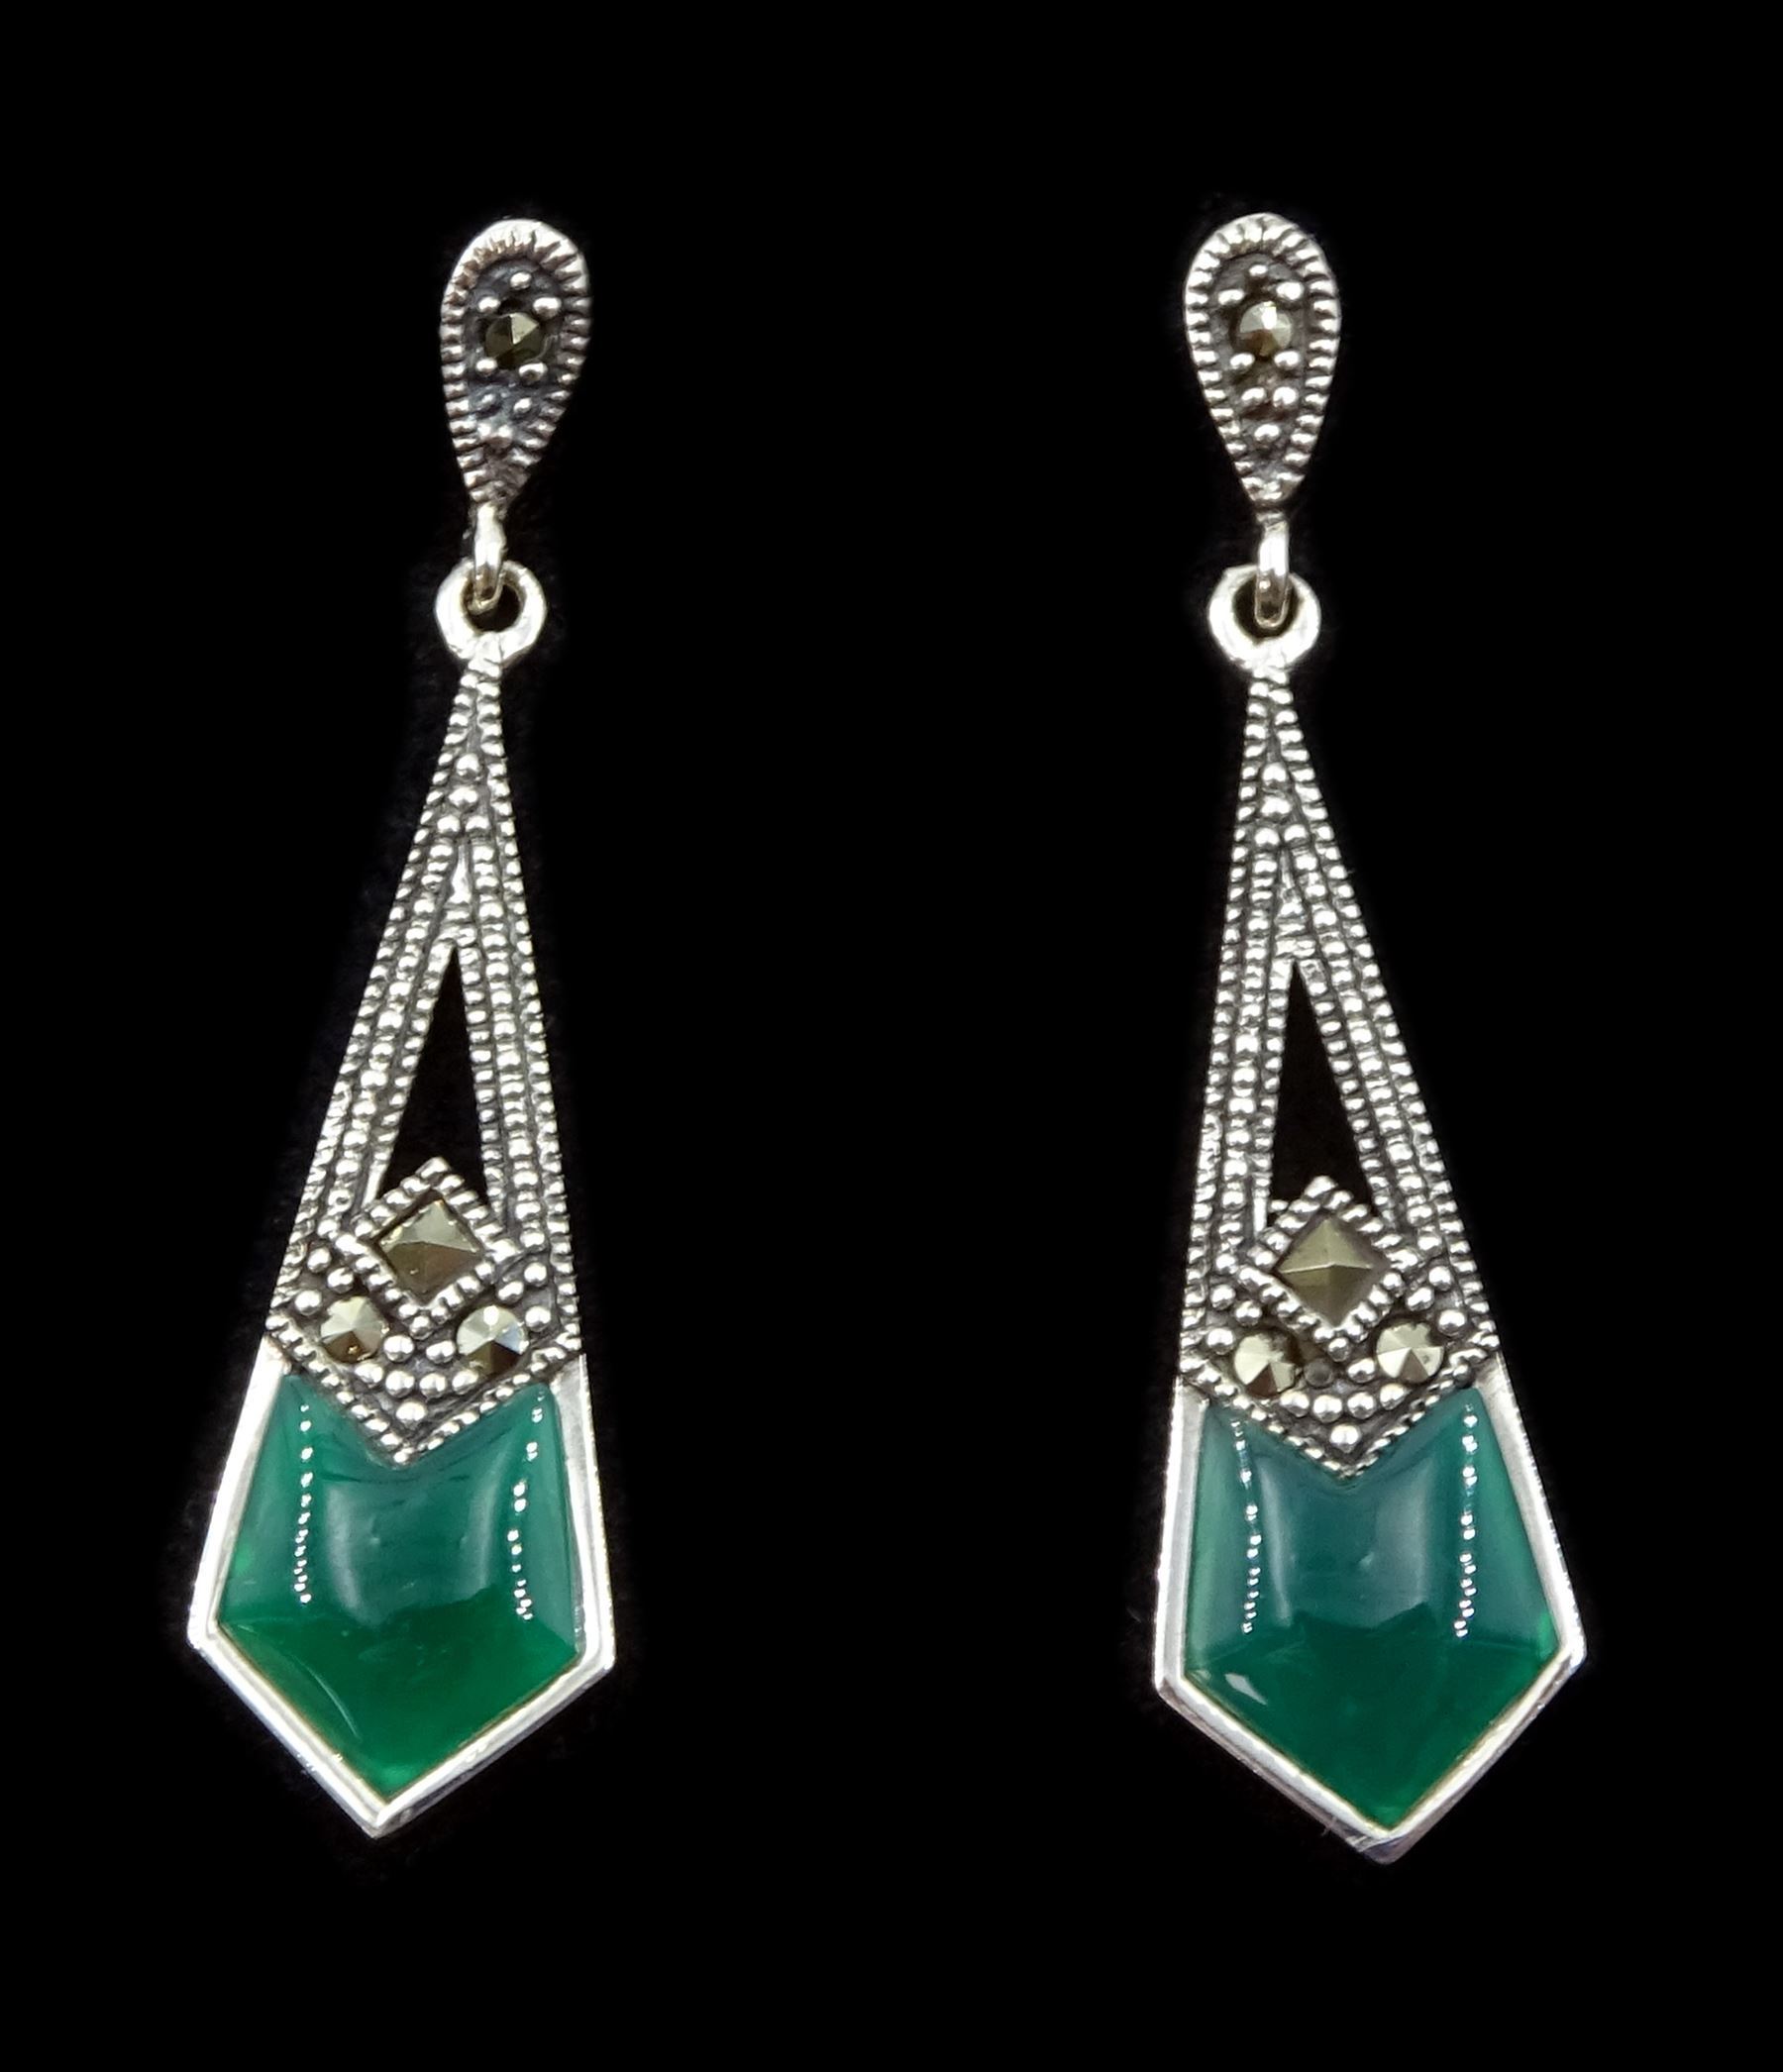 Pair of silver green onyx and marcasite pendant stud earrings